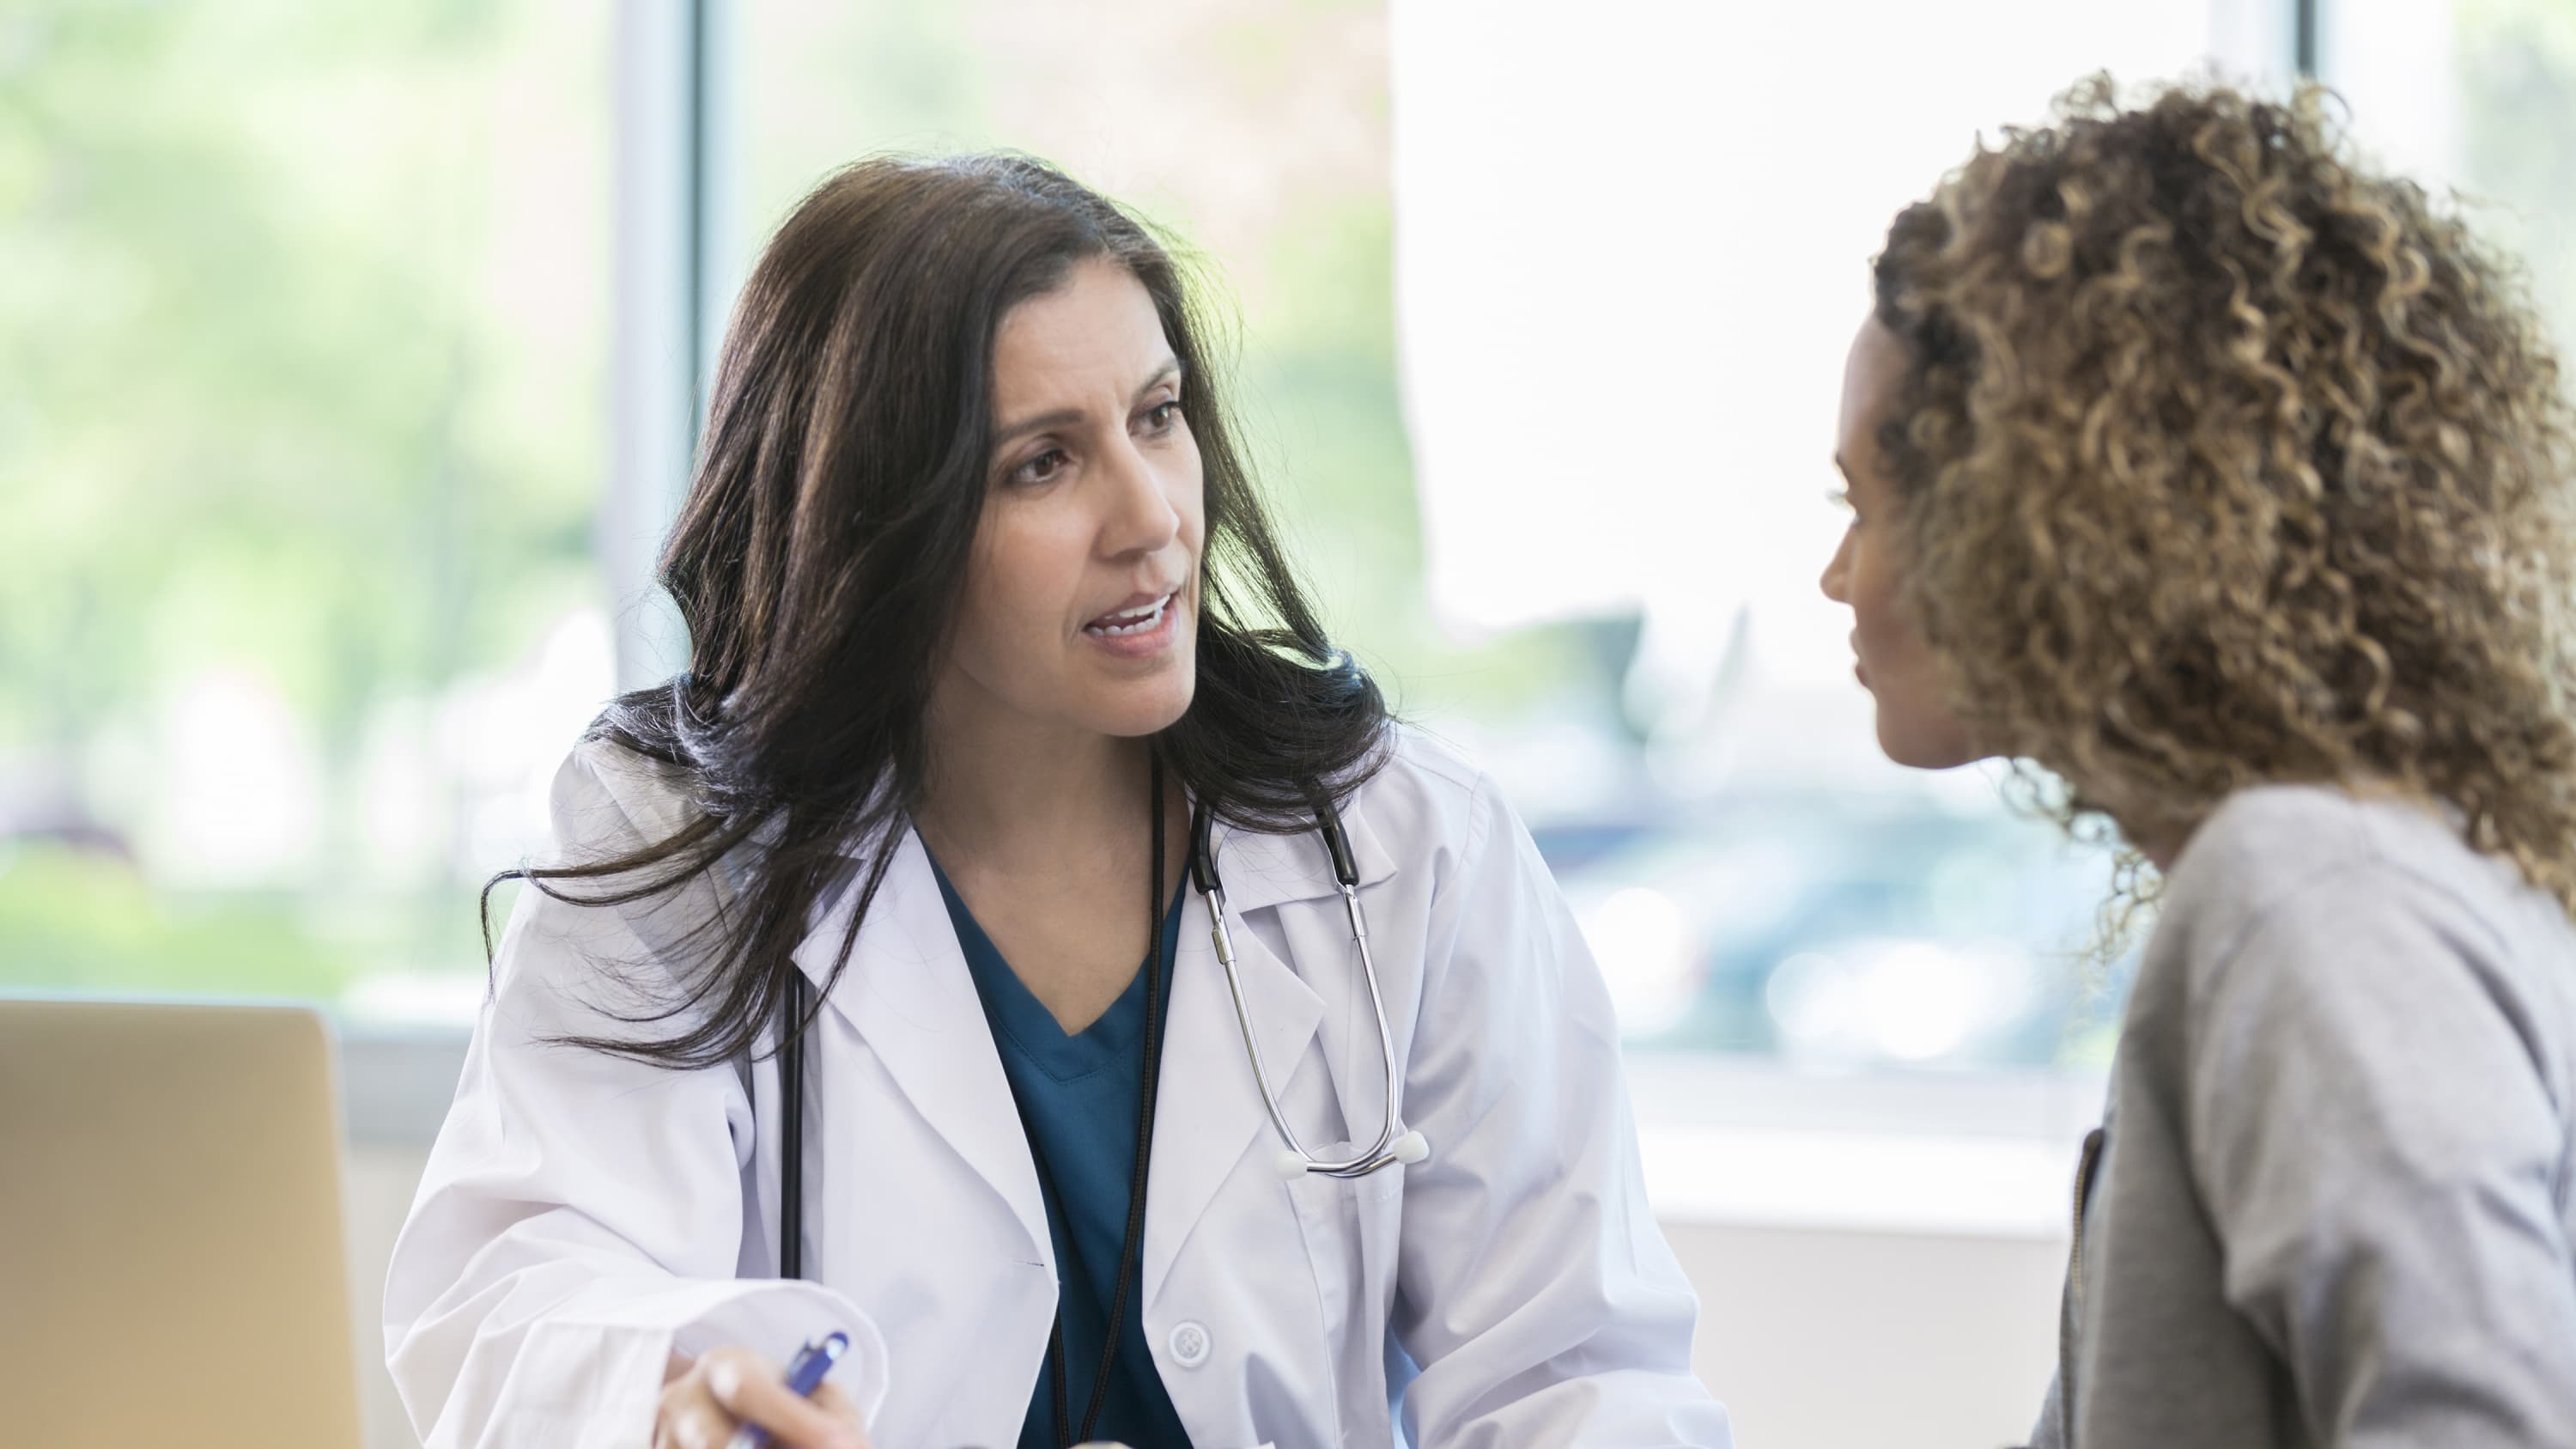 A doctor speaks with her patient, possibly discussing cervical insufficiency